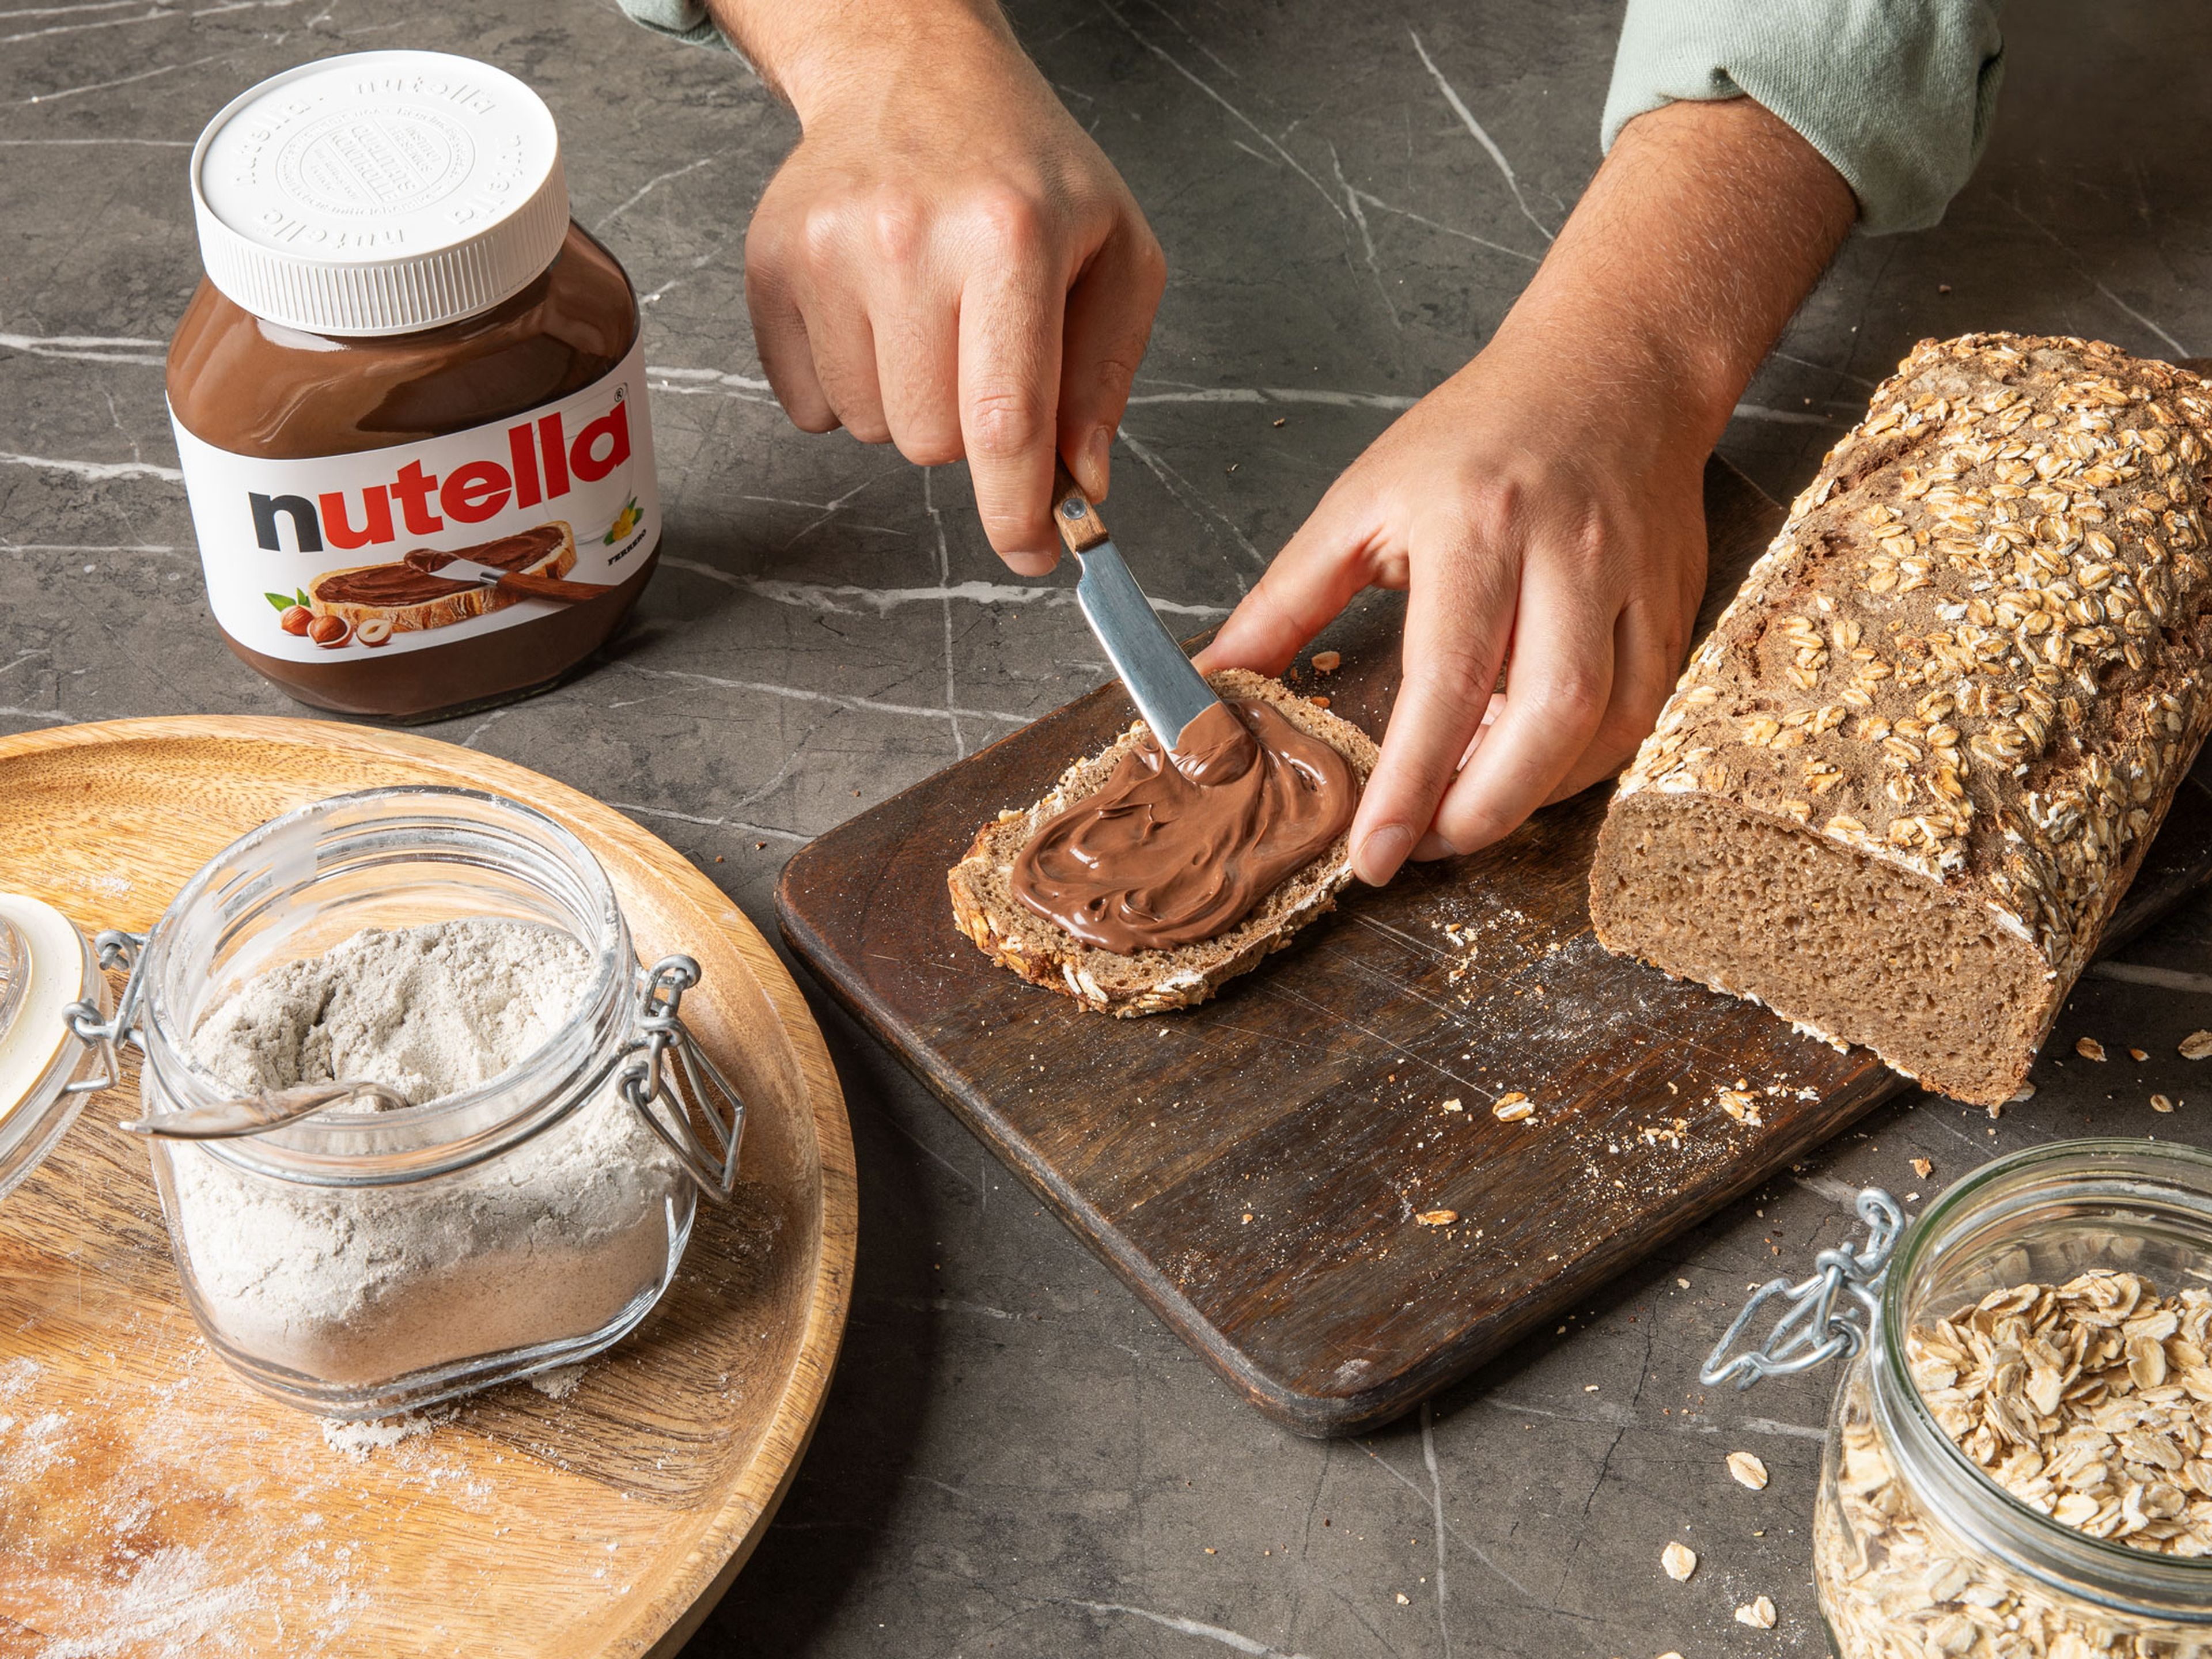 Slice the bread and spread with 15 g of nutella® per serving.